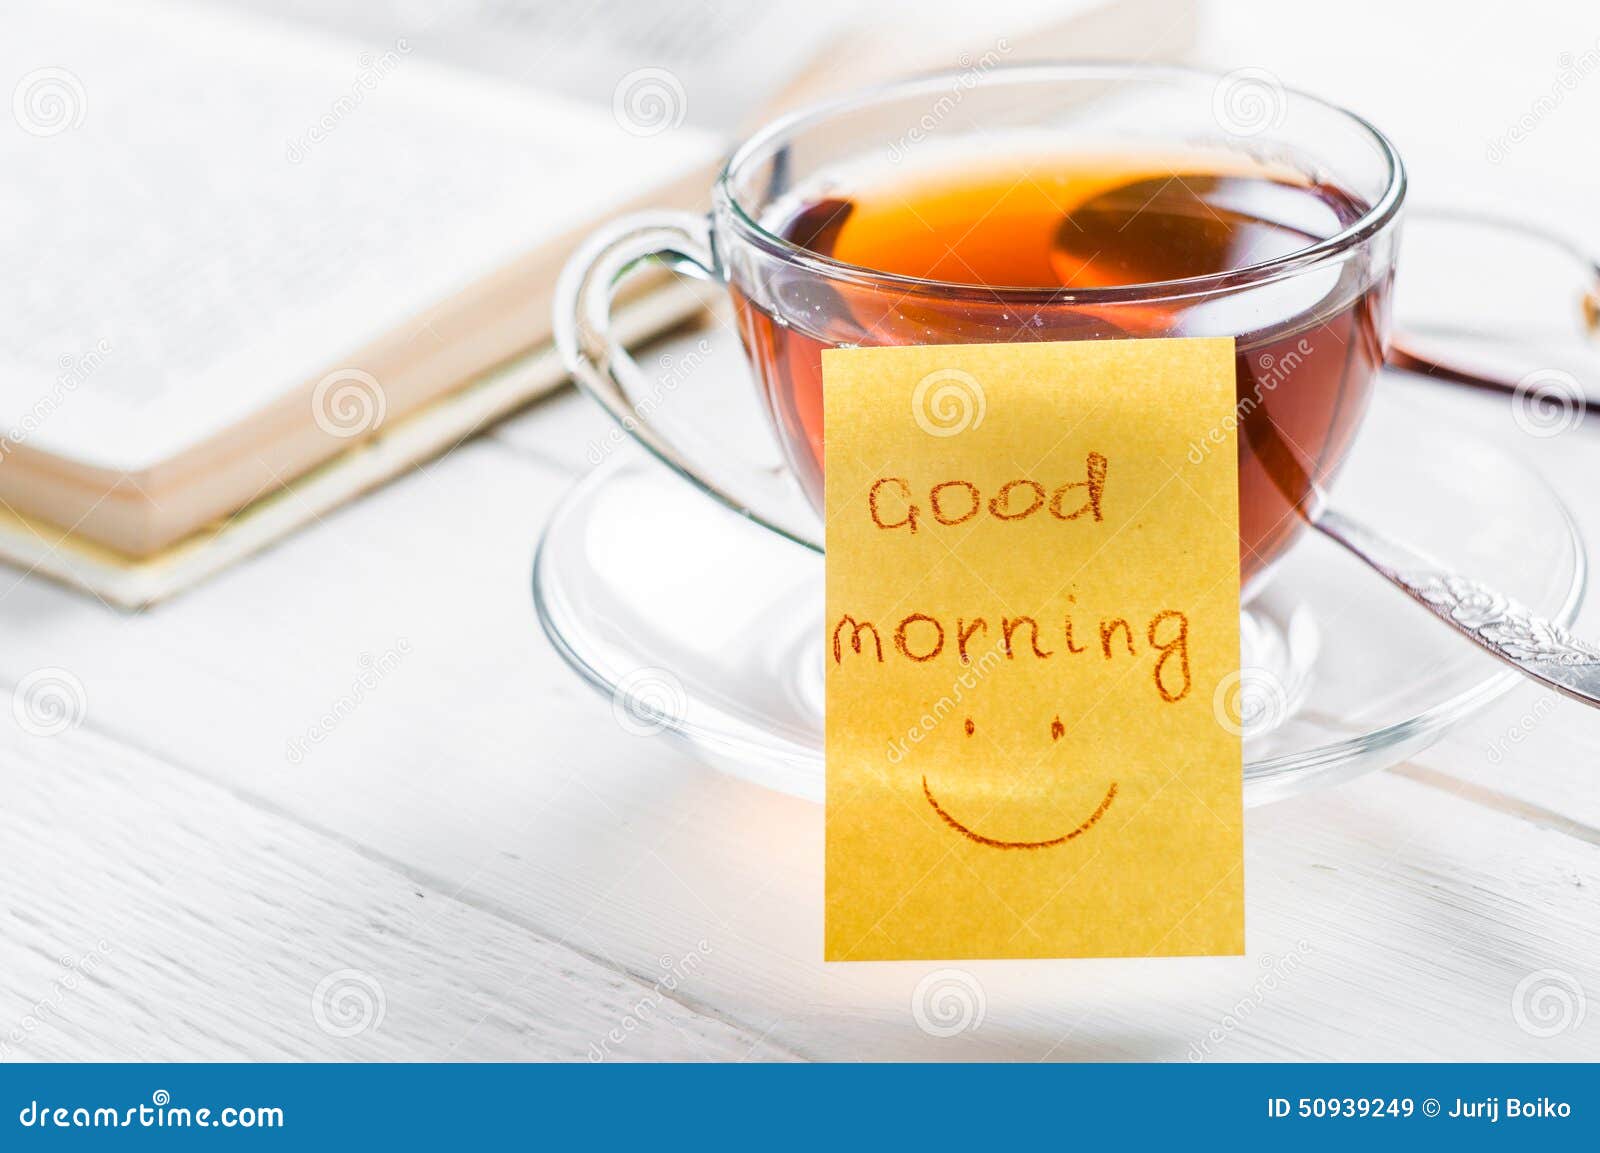 Good Morning with Smile and Cup Tea Stock Image - Image of ...